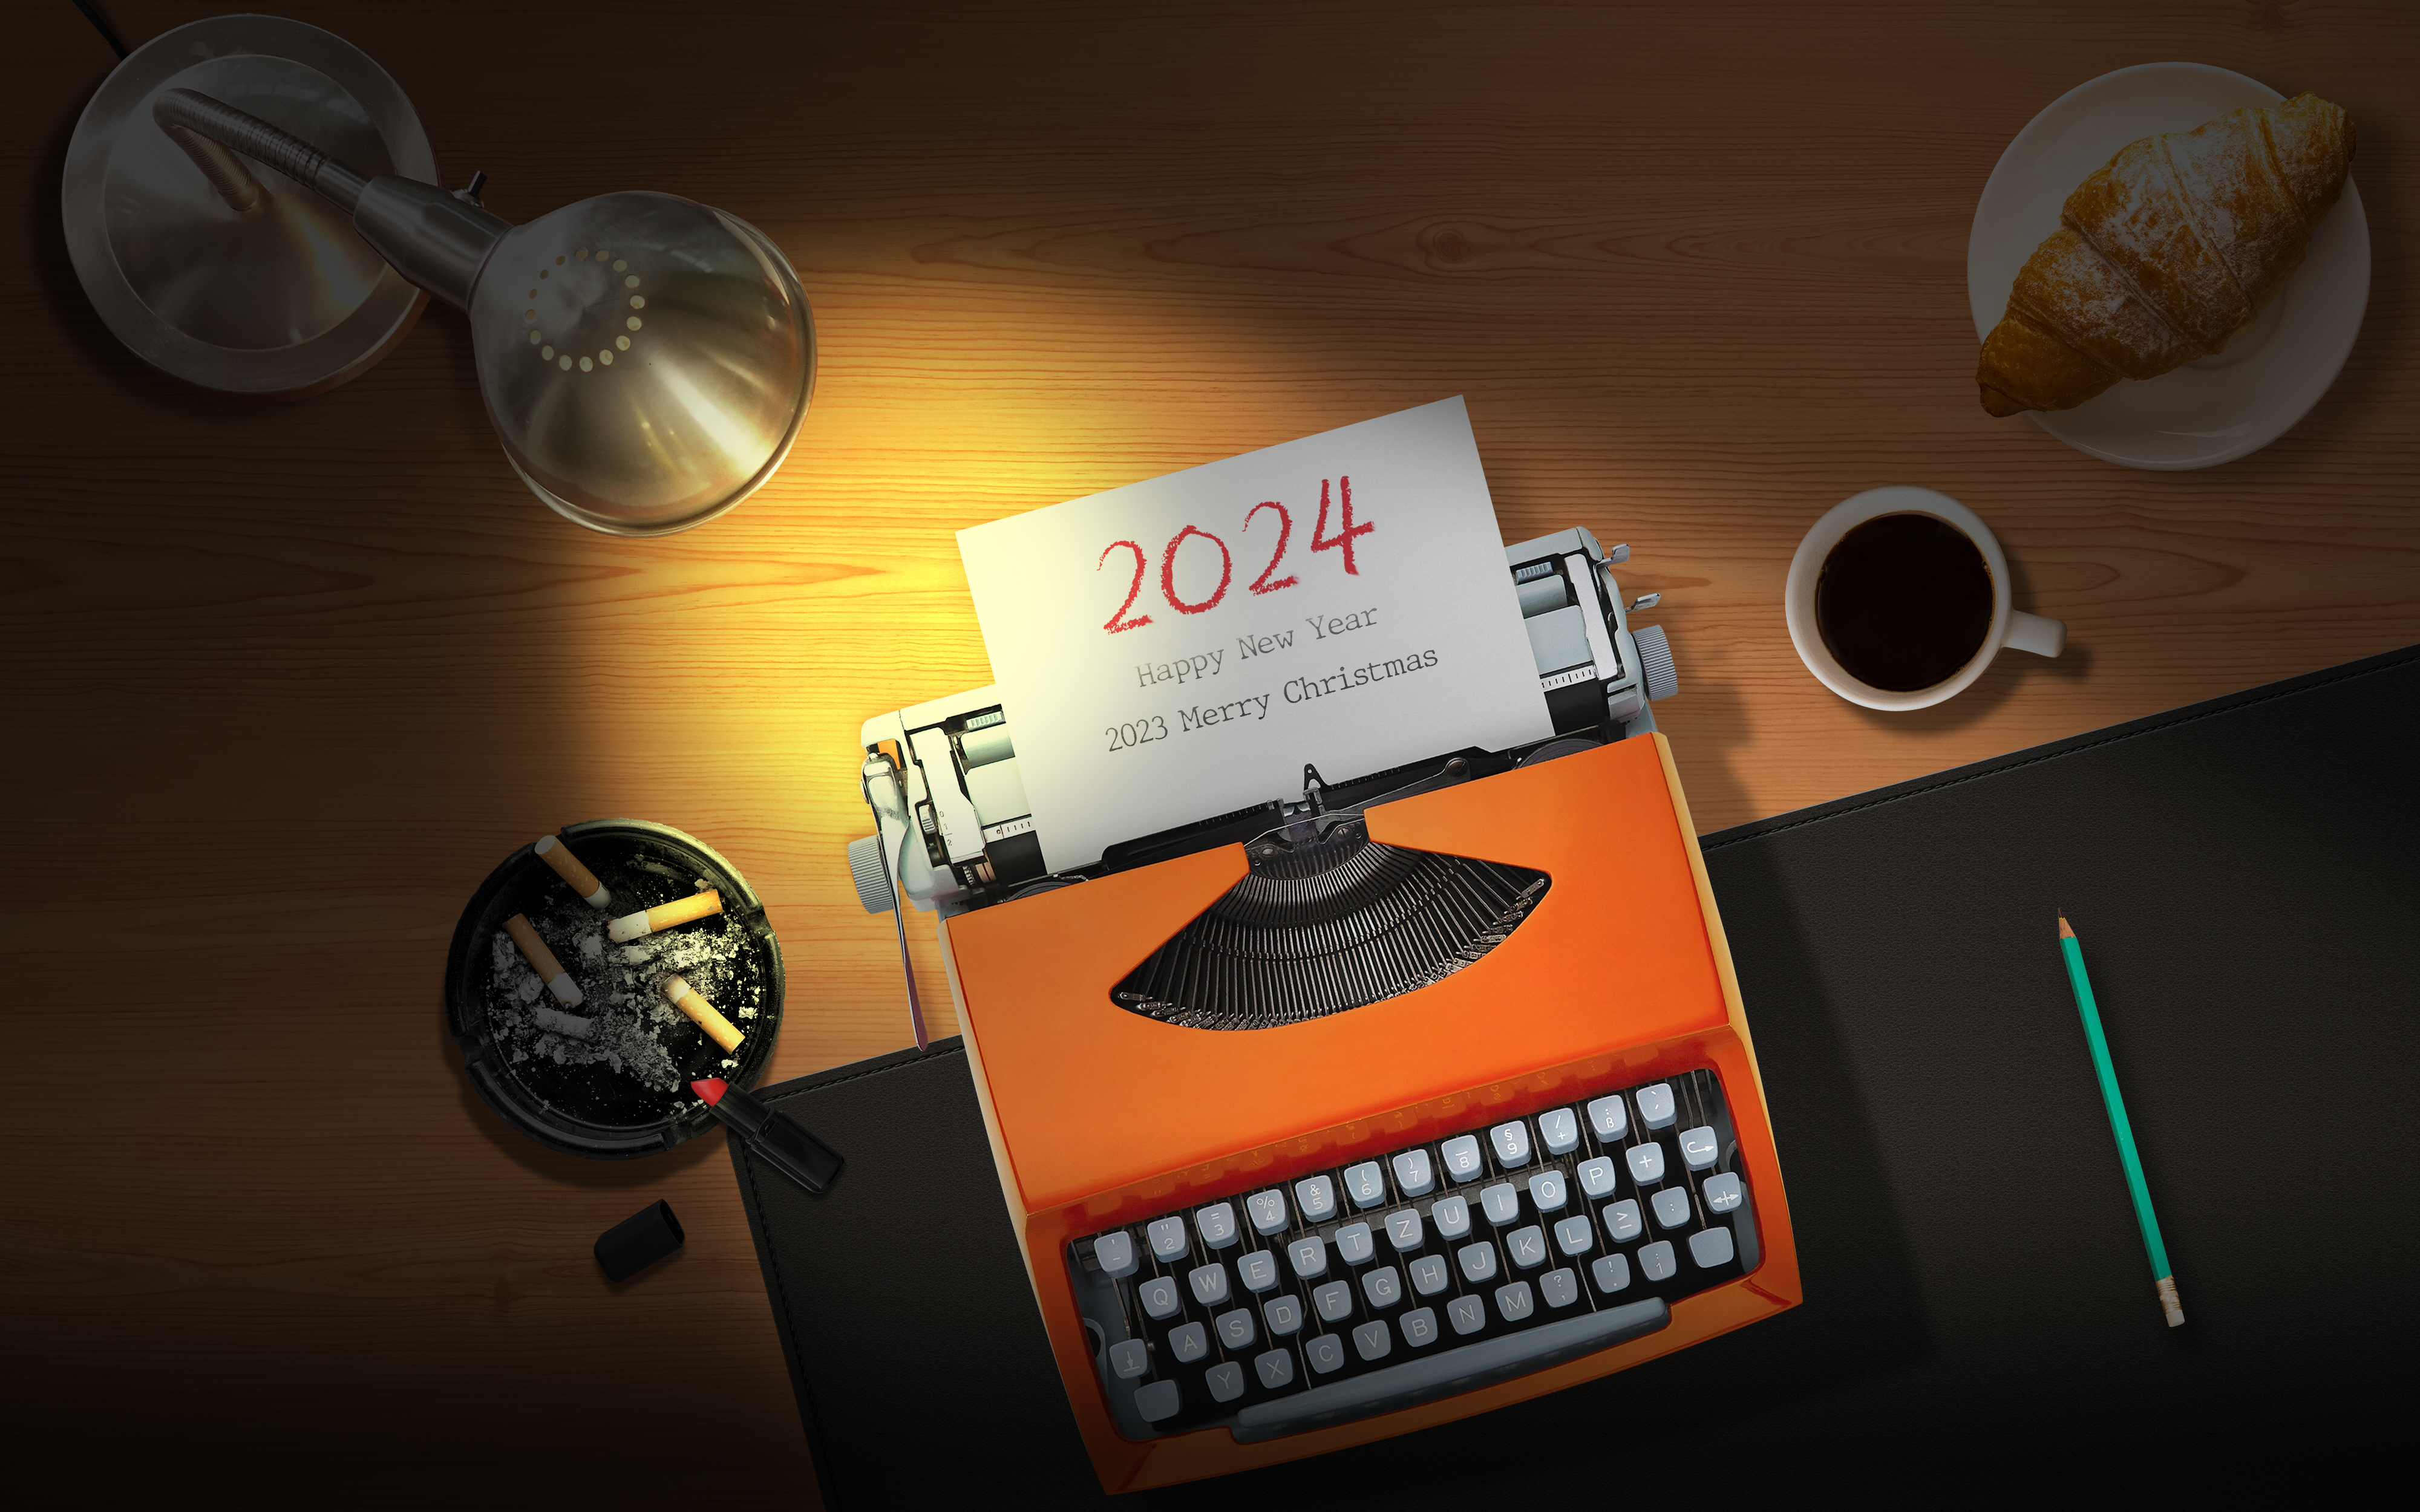 General 4000x2500 2024 (year) New Year typewriters lamp cigarettes drink ashtrays wooden table cup coffee plates pencils croissants holiday